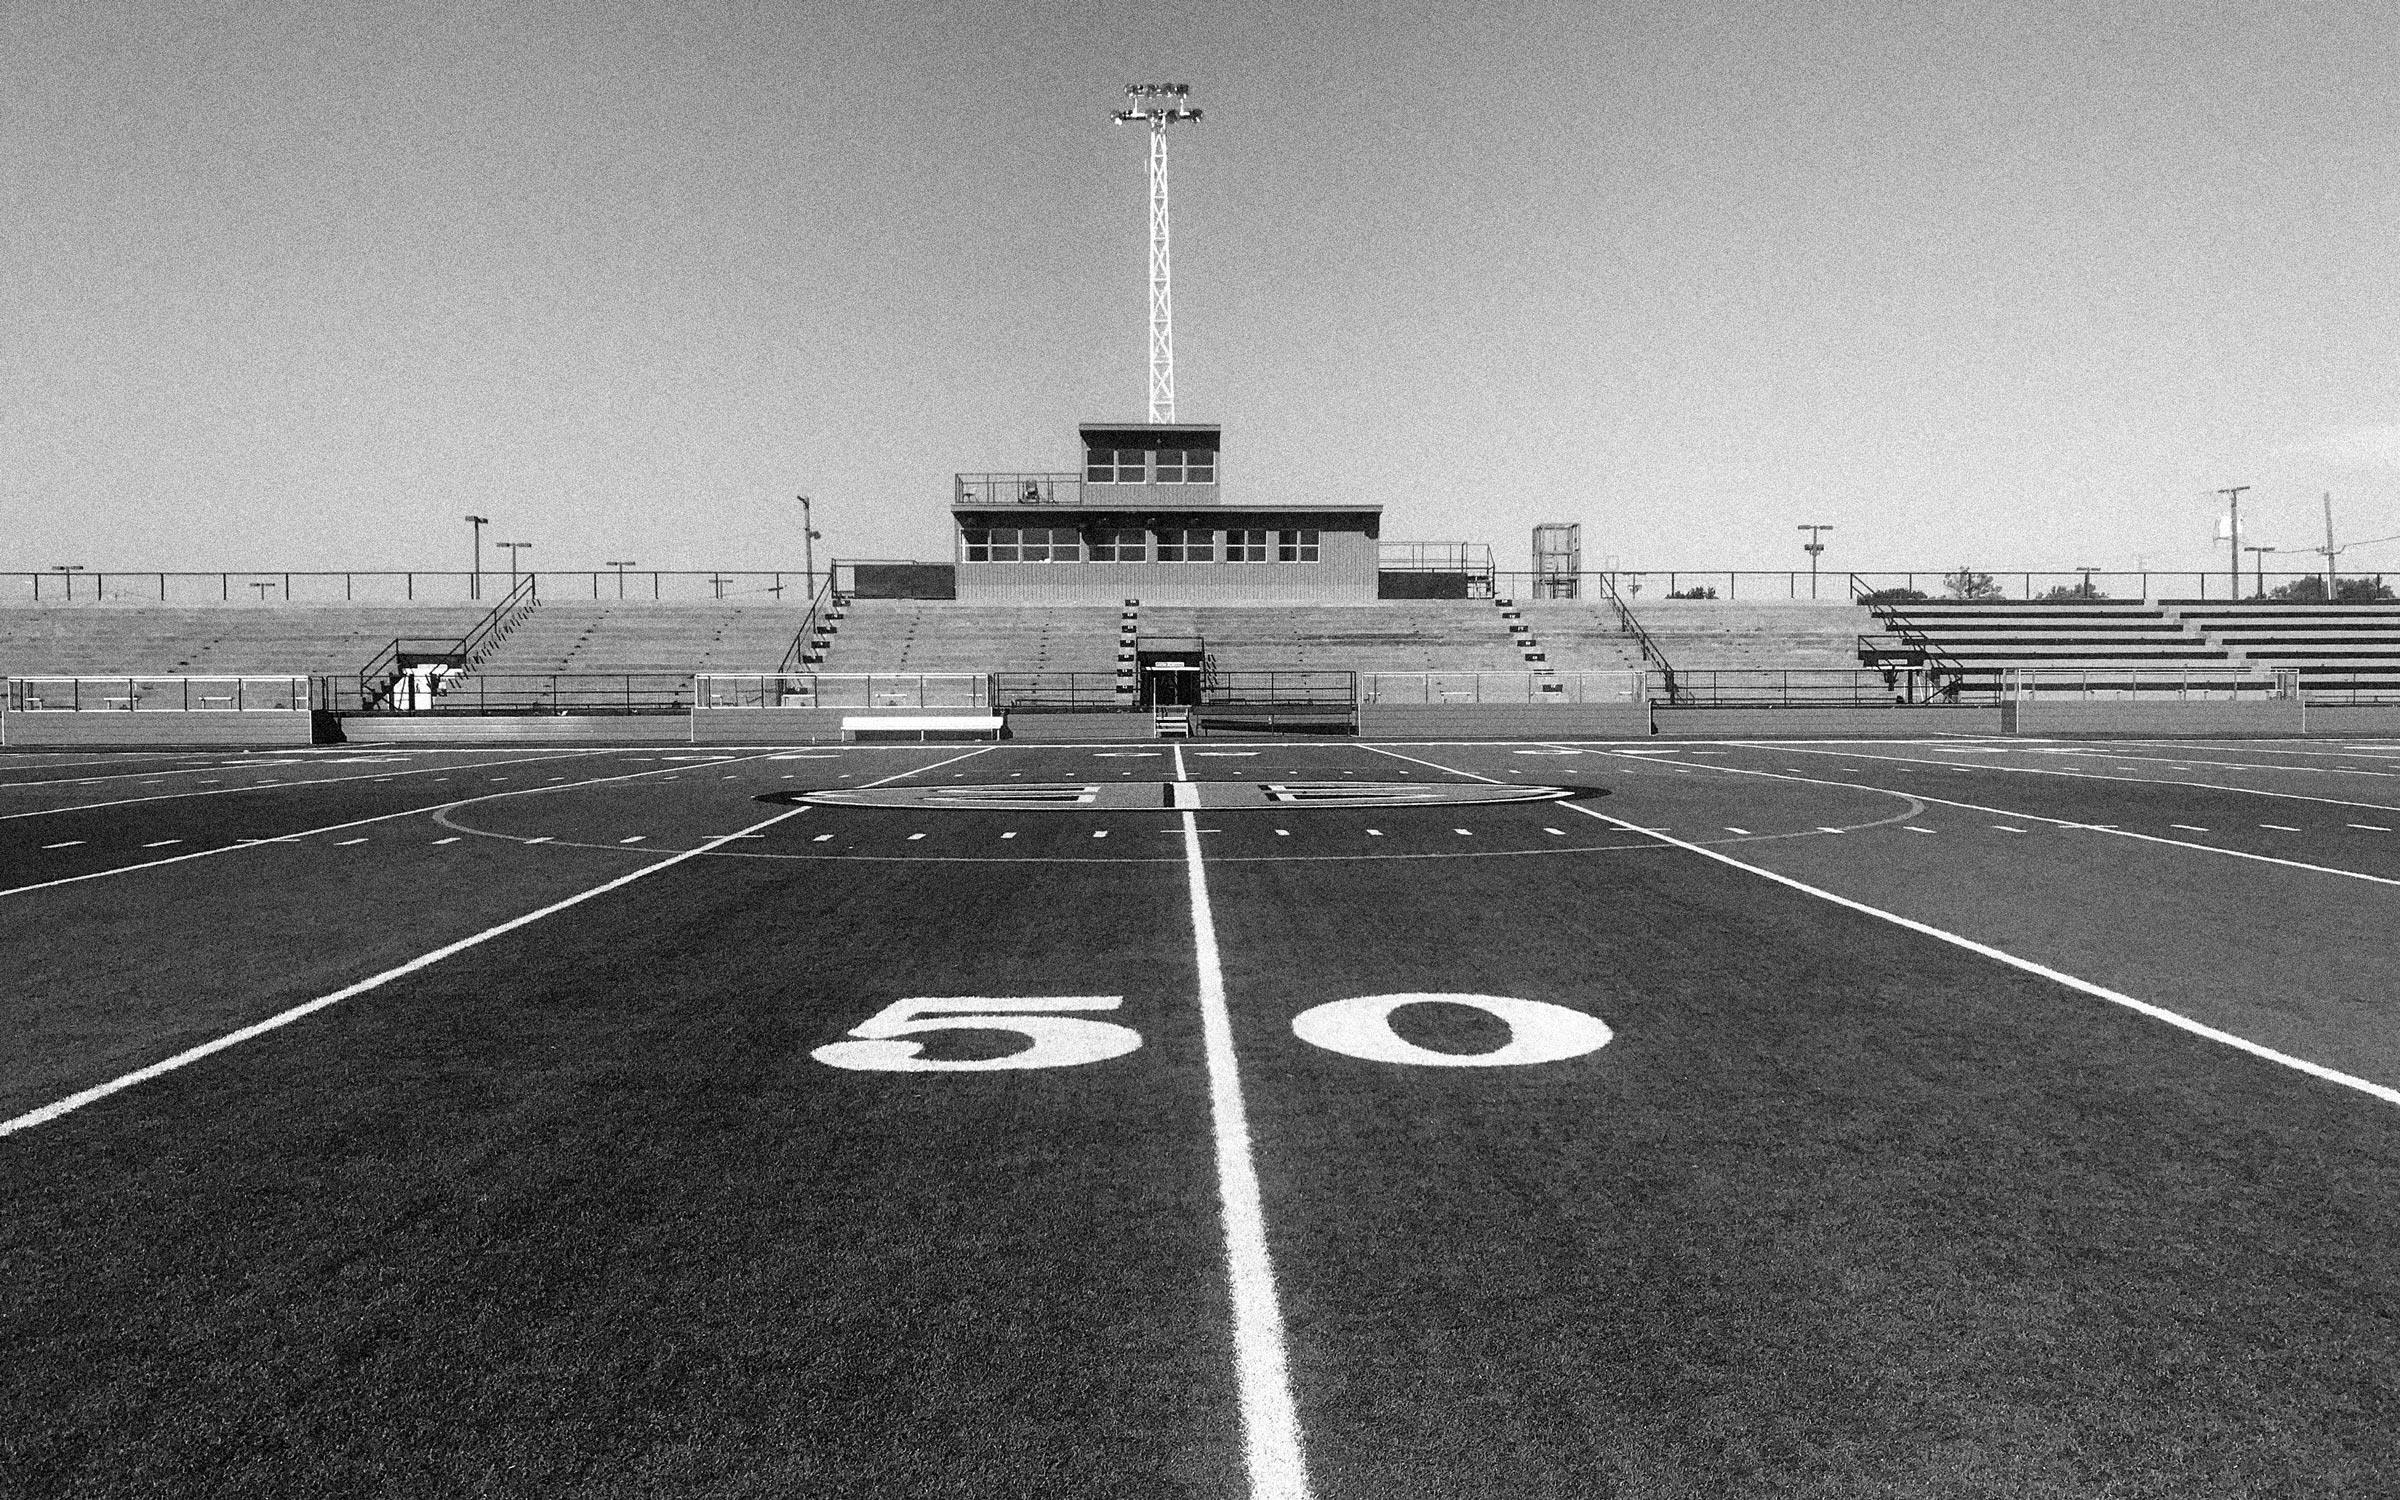 football field black and white photography